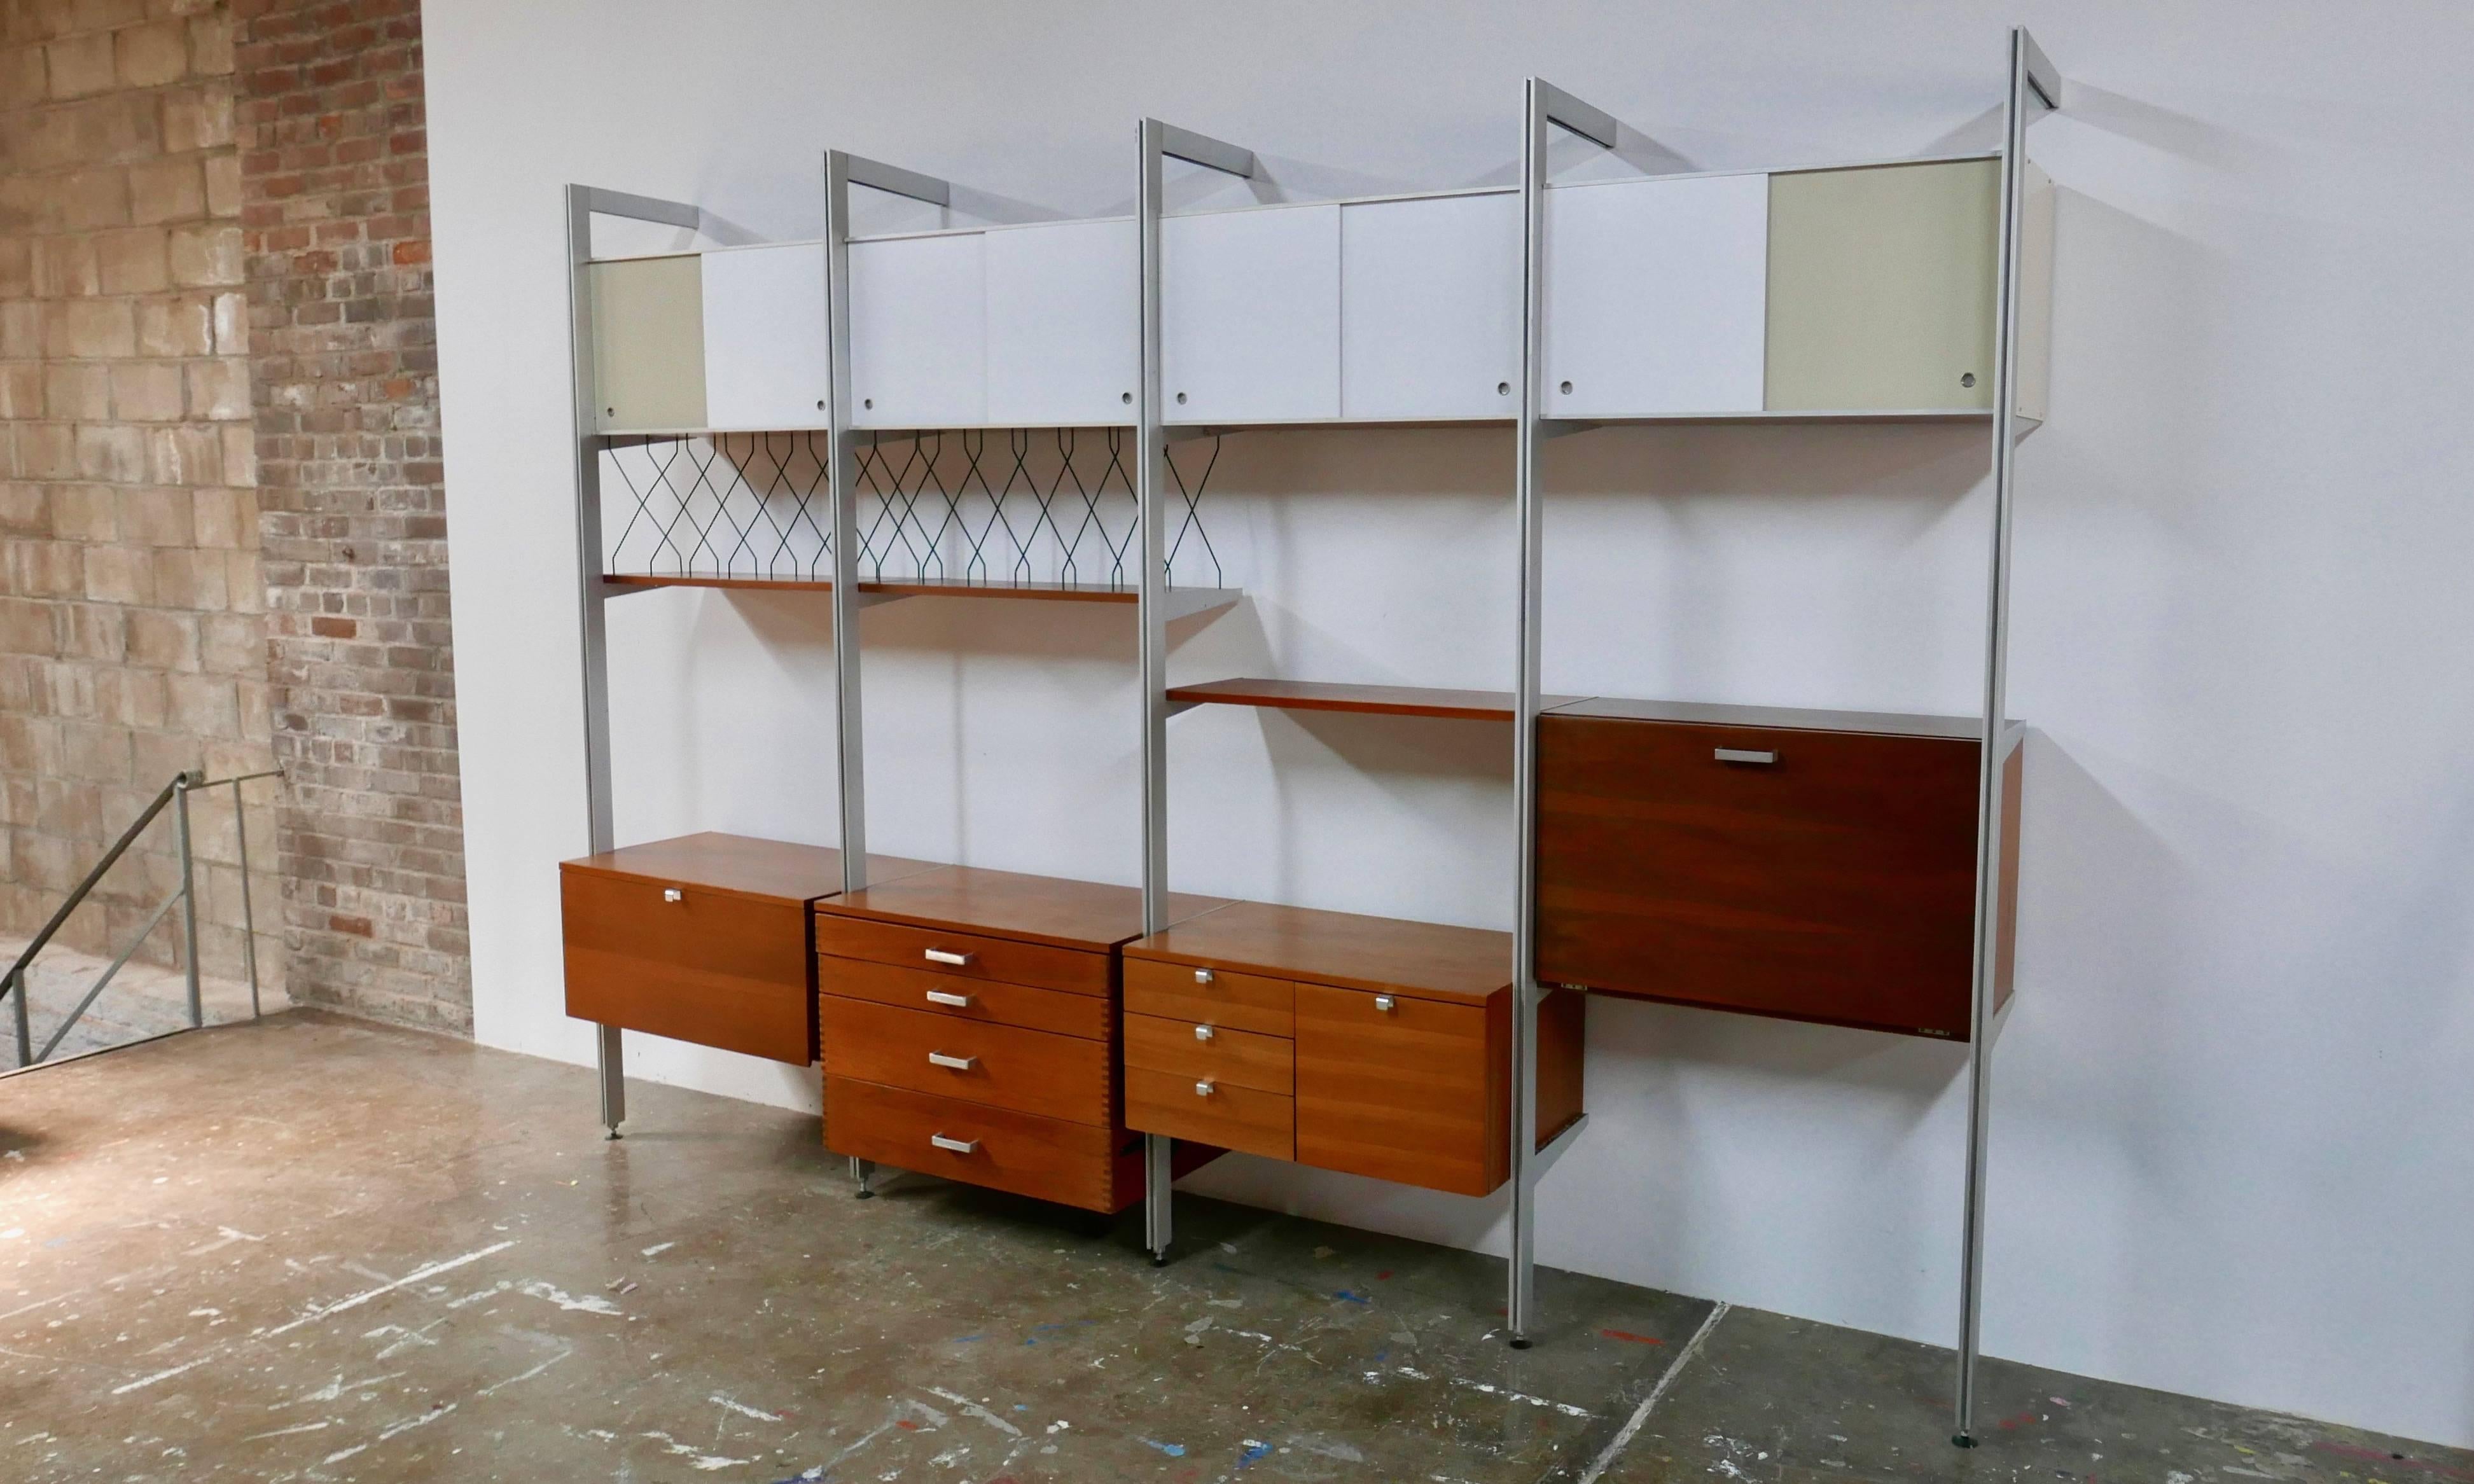 Four section storage unit designed by George Nelson for Herman Miller. Sliding doors along the top offer cabinet storage. The lower cabinets offer drawers and a hanging file along with a drop down desk. Each section is 32" wide. The shelf depth